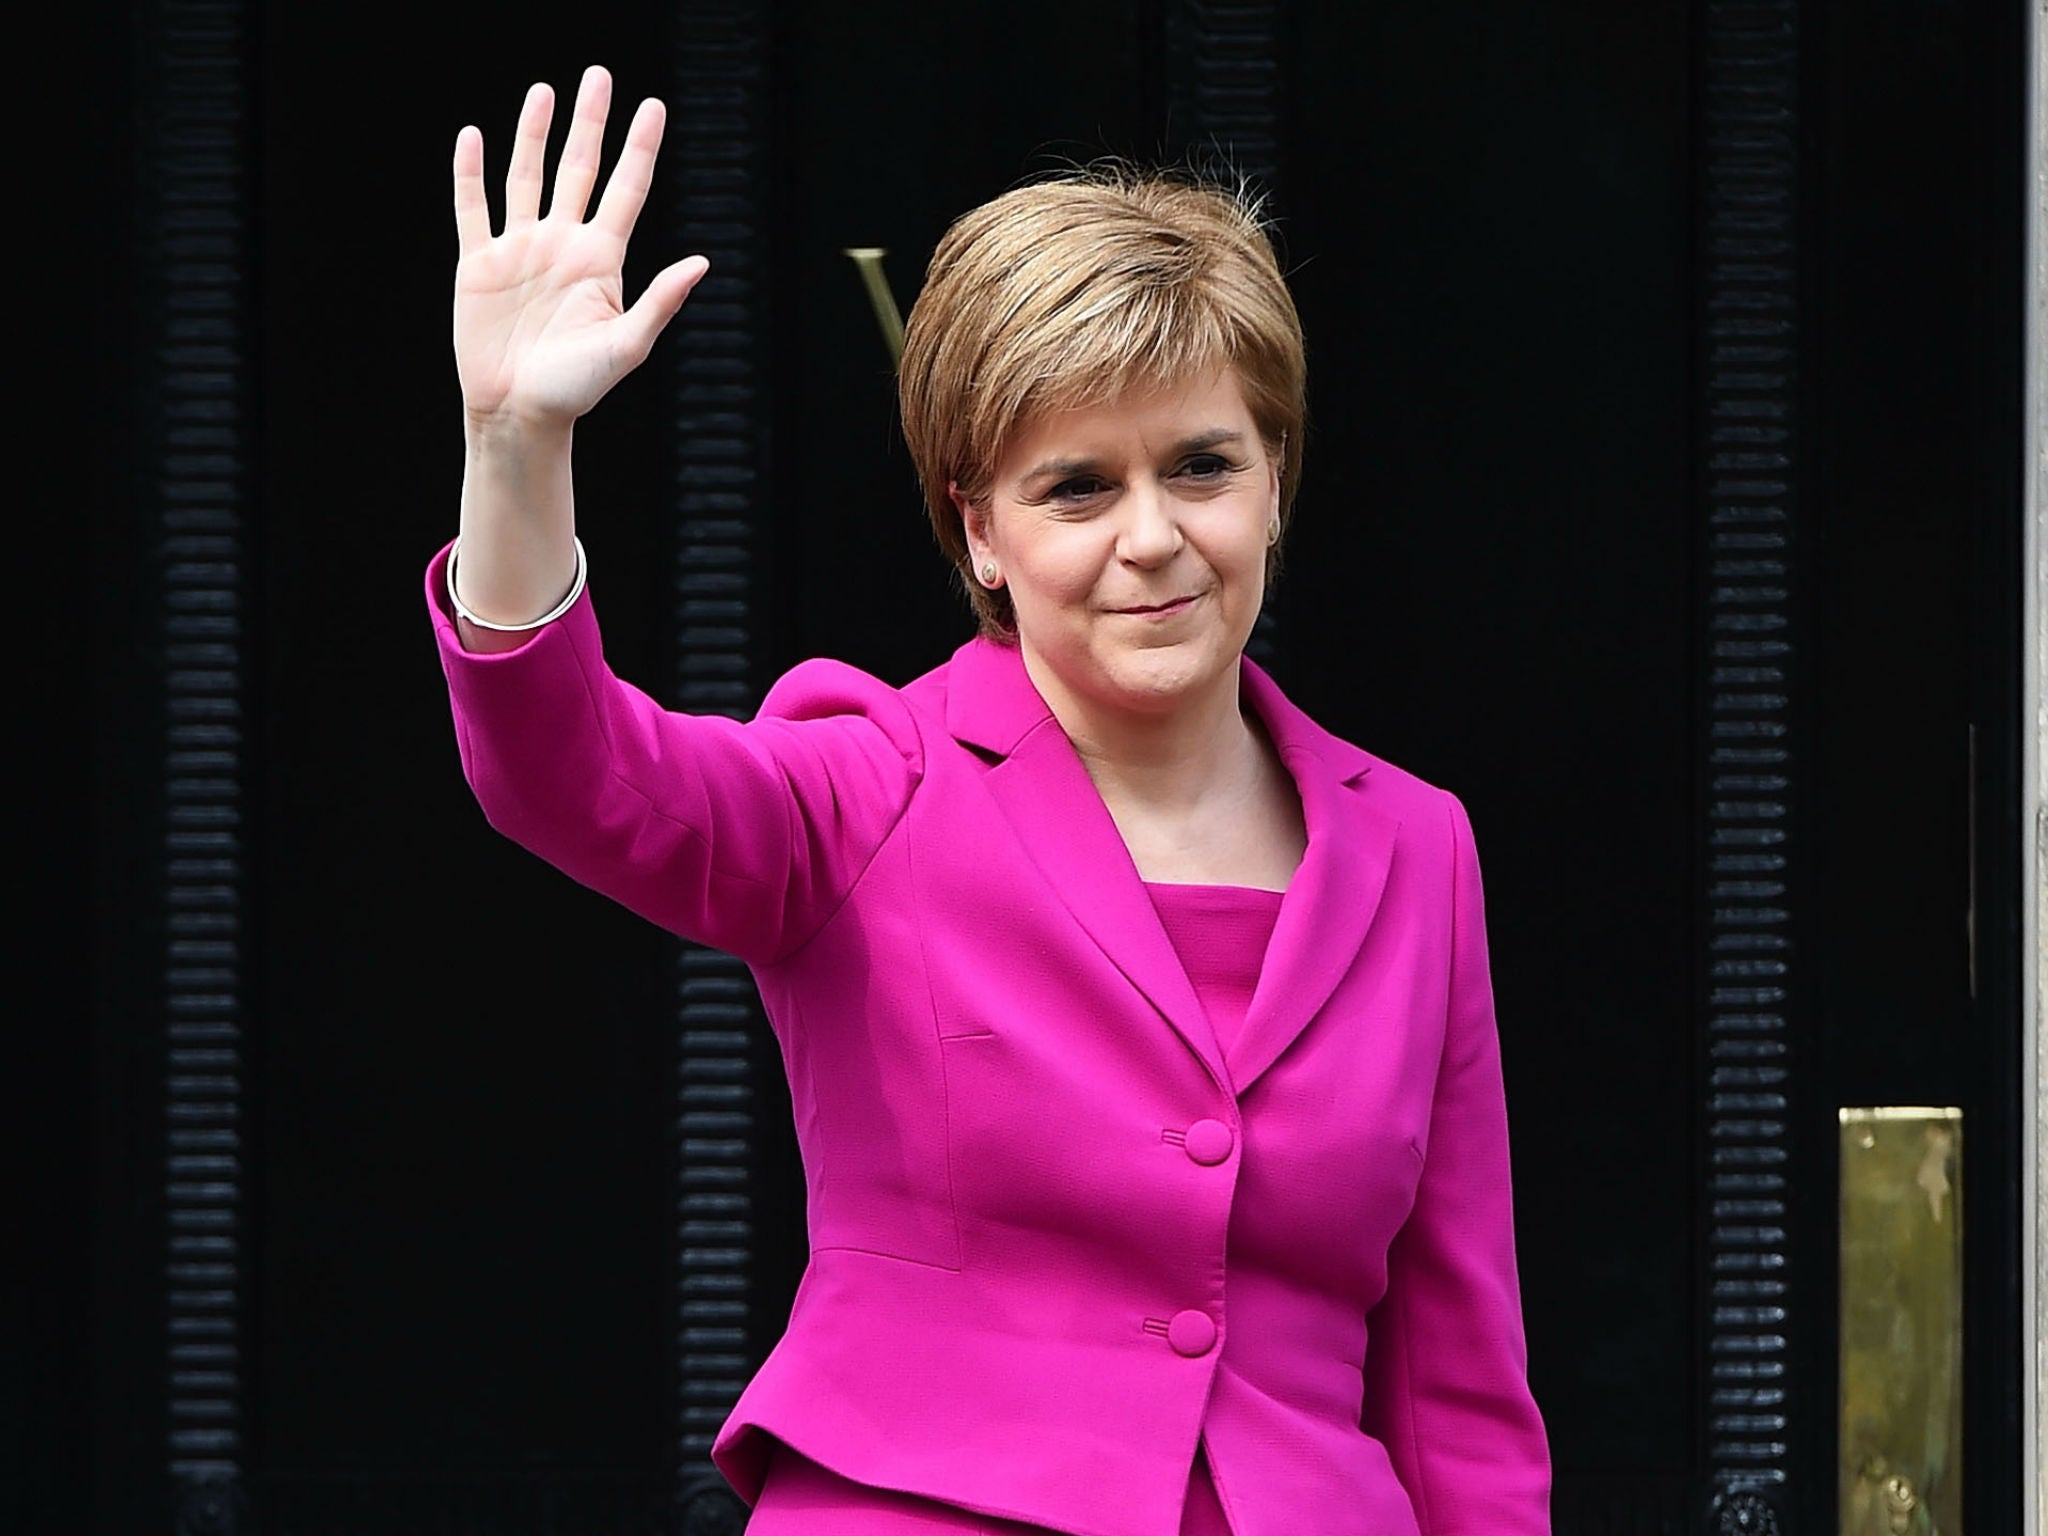 Ms Sturgeon has managed to establish herself as one of the most powerful women in British politics